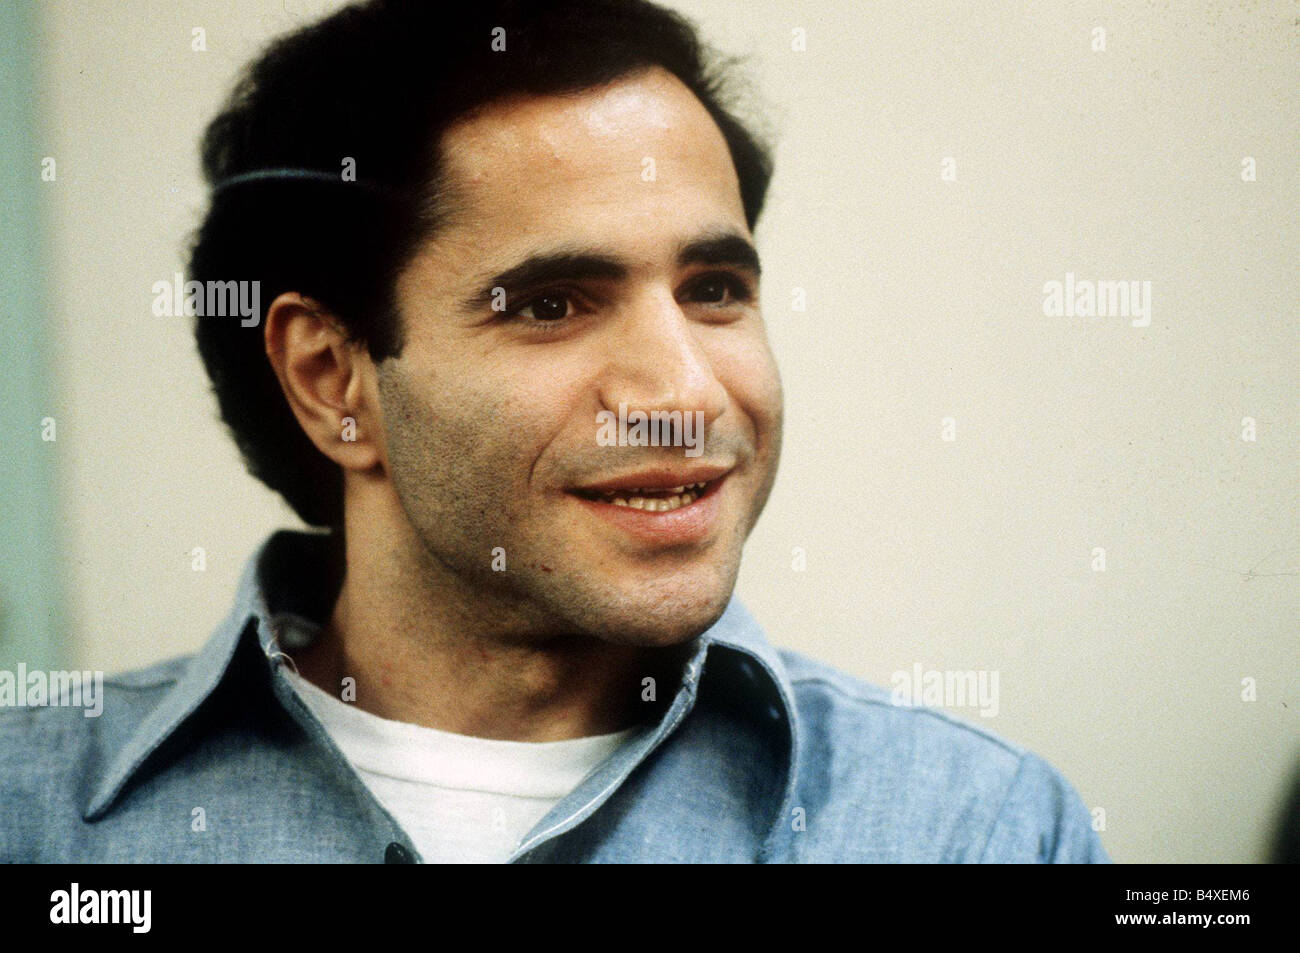 Sirhan Bishara Sirhan born March 19 1944 was convicted of murdering Senator Robert F Kennedy Sirhan shot Kennedy shortly after midnight on June 5 1968 in Los Angeles just minutes after the senator had won the California presidential primary Kennedy lived until the early morning hours of June 6 1968 Soledad Prison USA Stock Photo